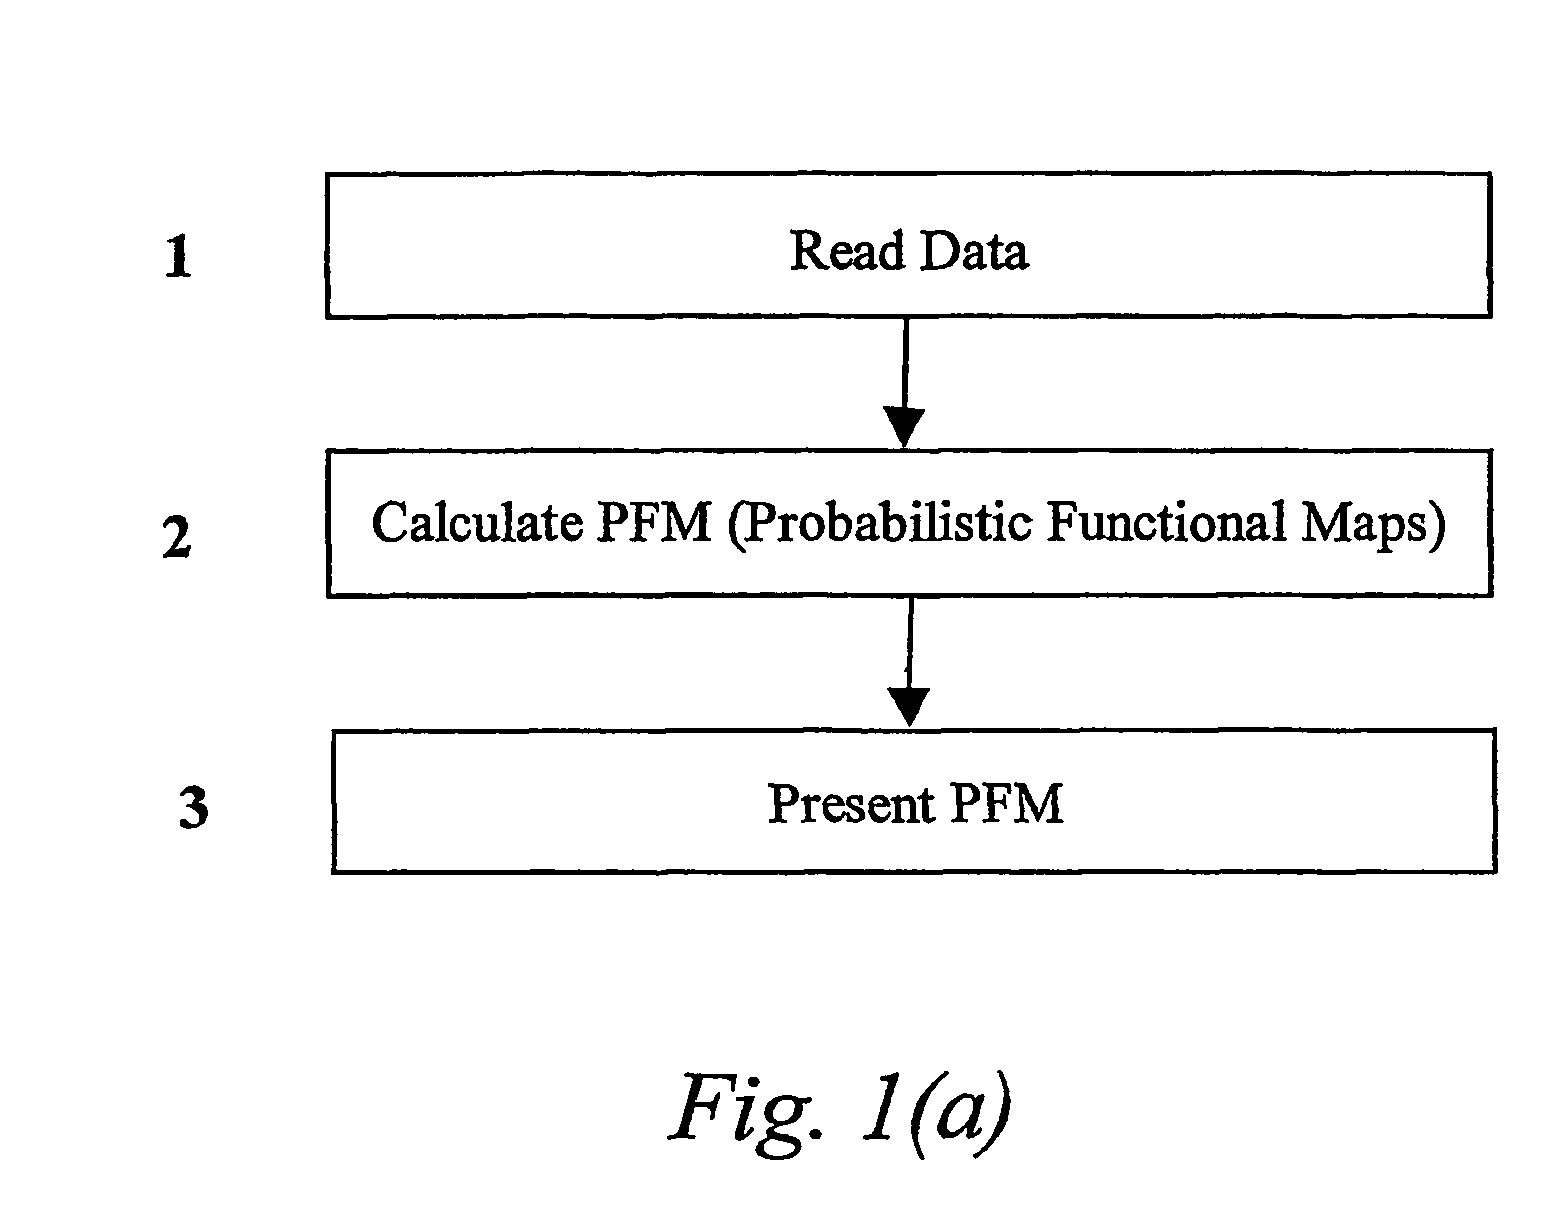 Methods and apparatus for calculating and presenting the probabilistic functional maps of the human brain